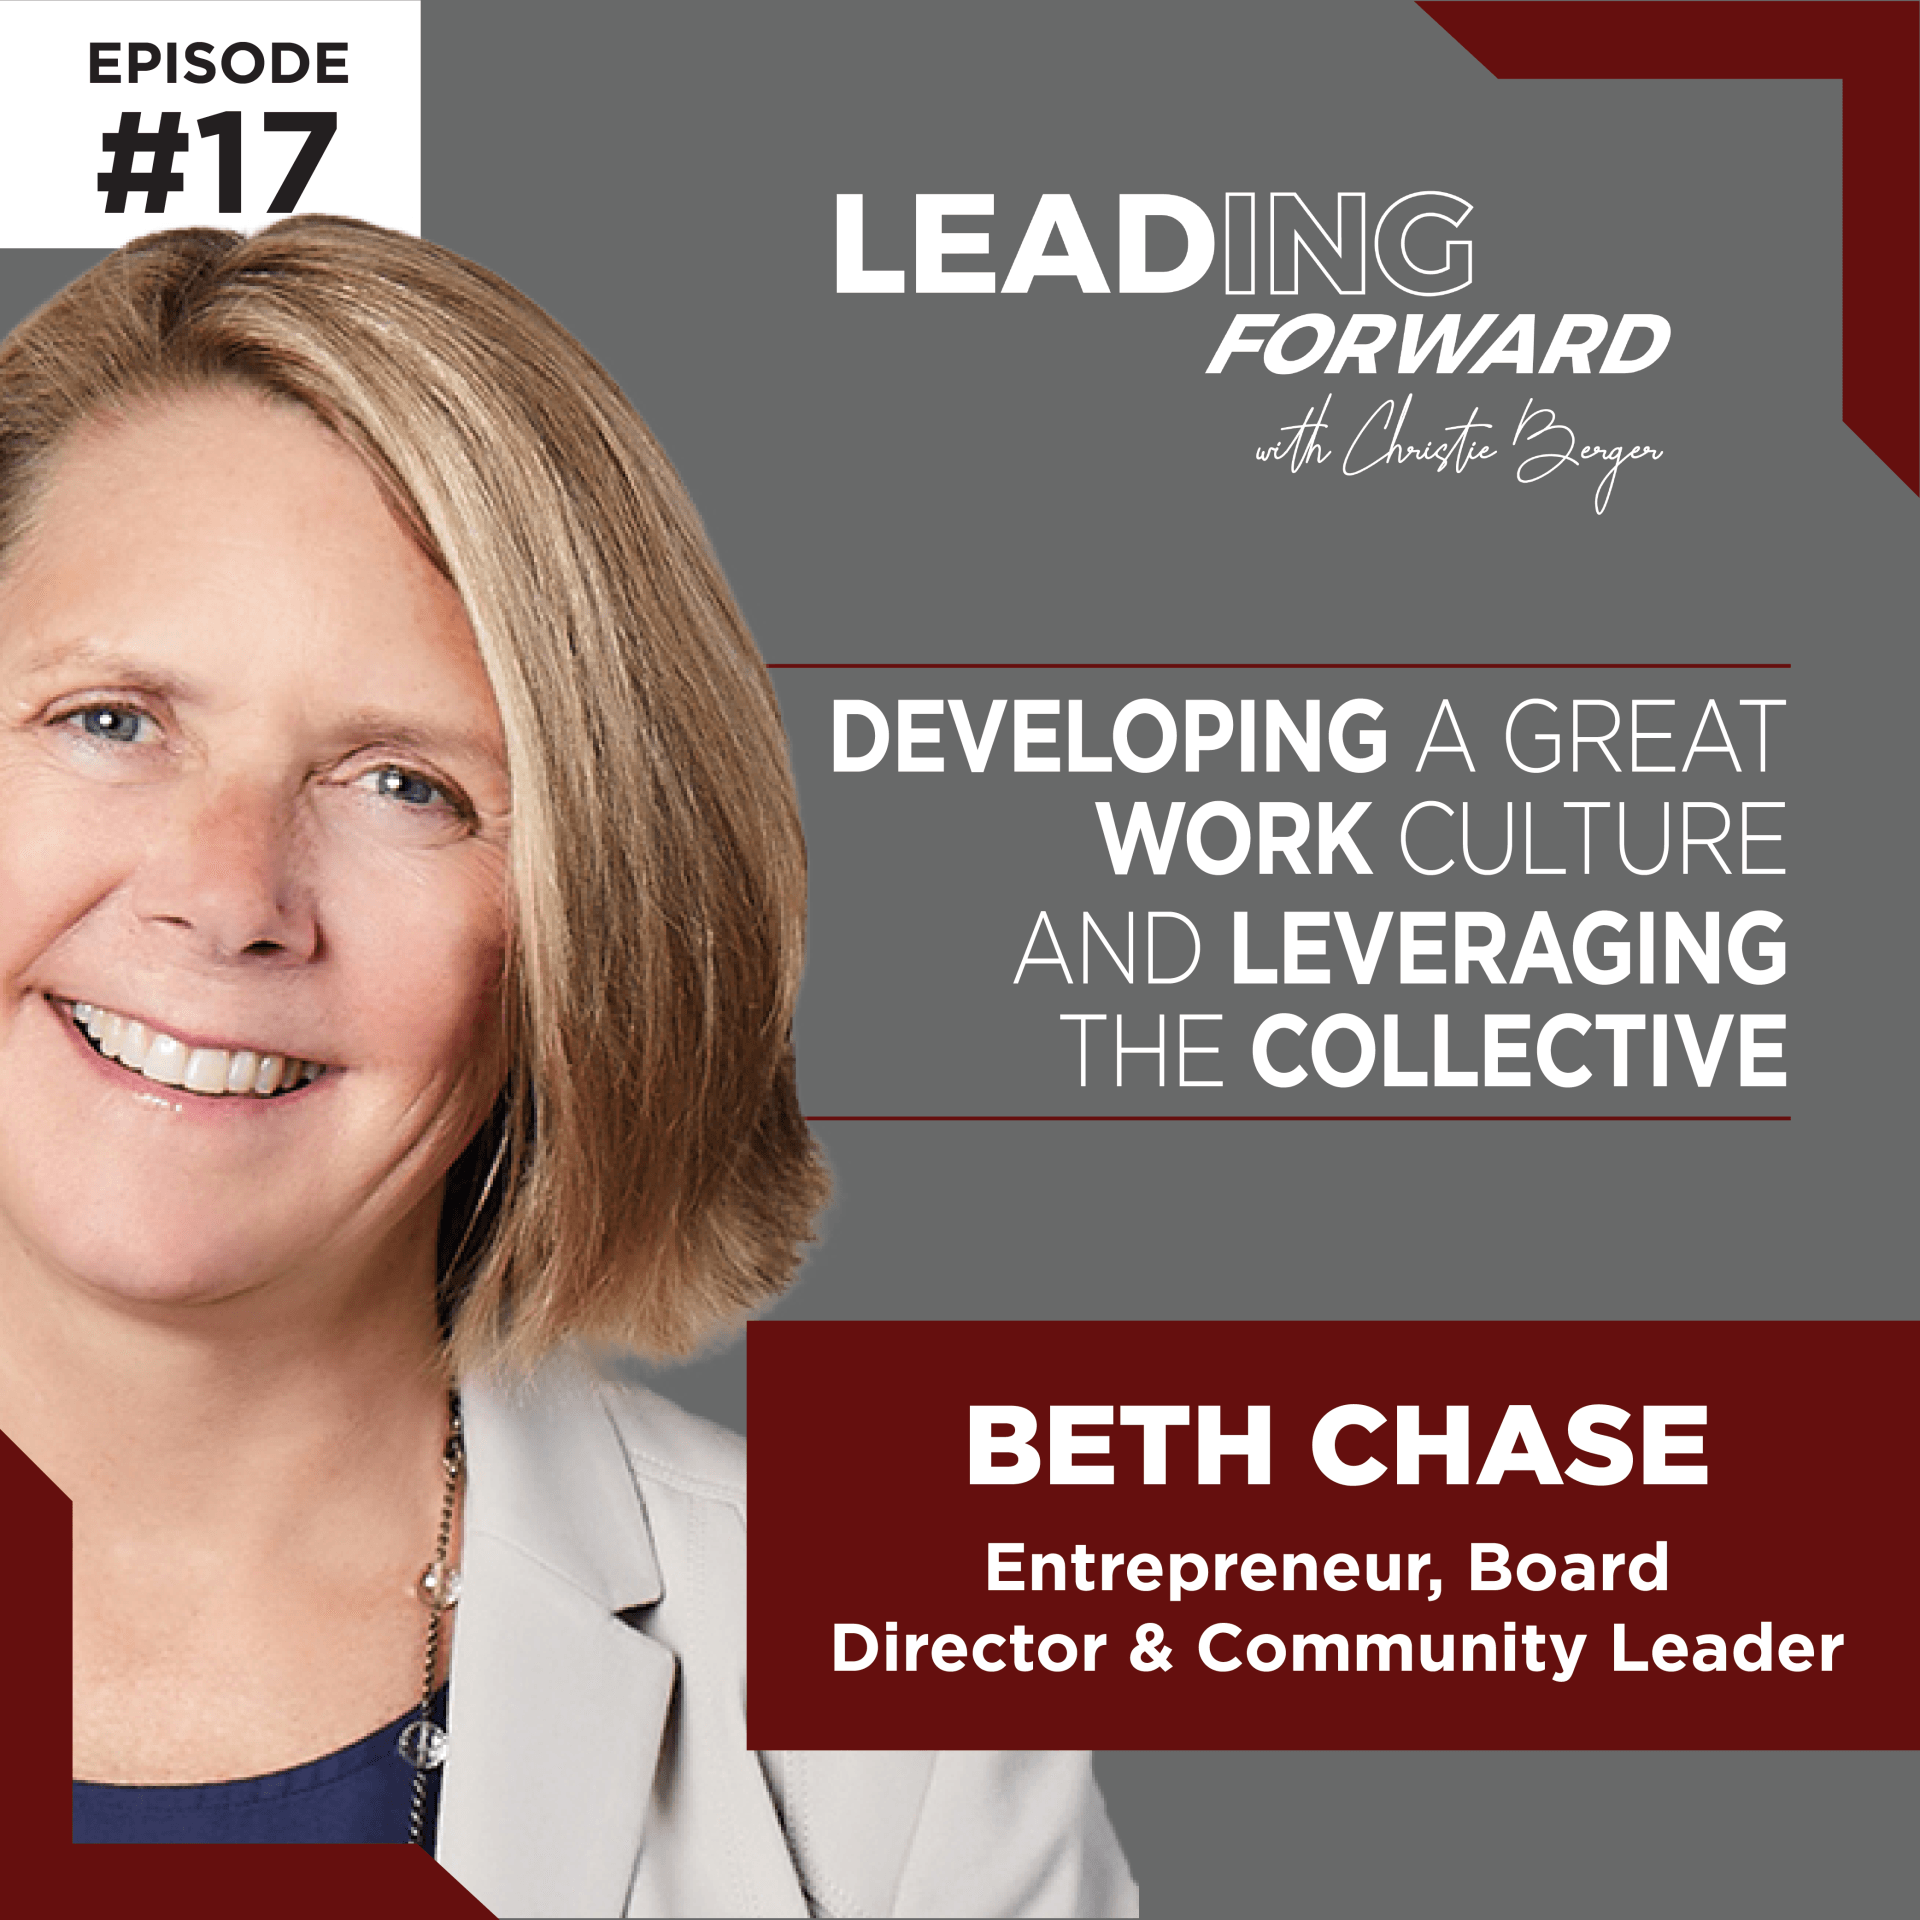 Leading Forward Podcast-Beth Chase came onto the show to discuss their experience running businesses